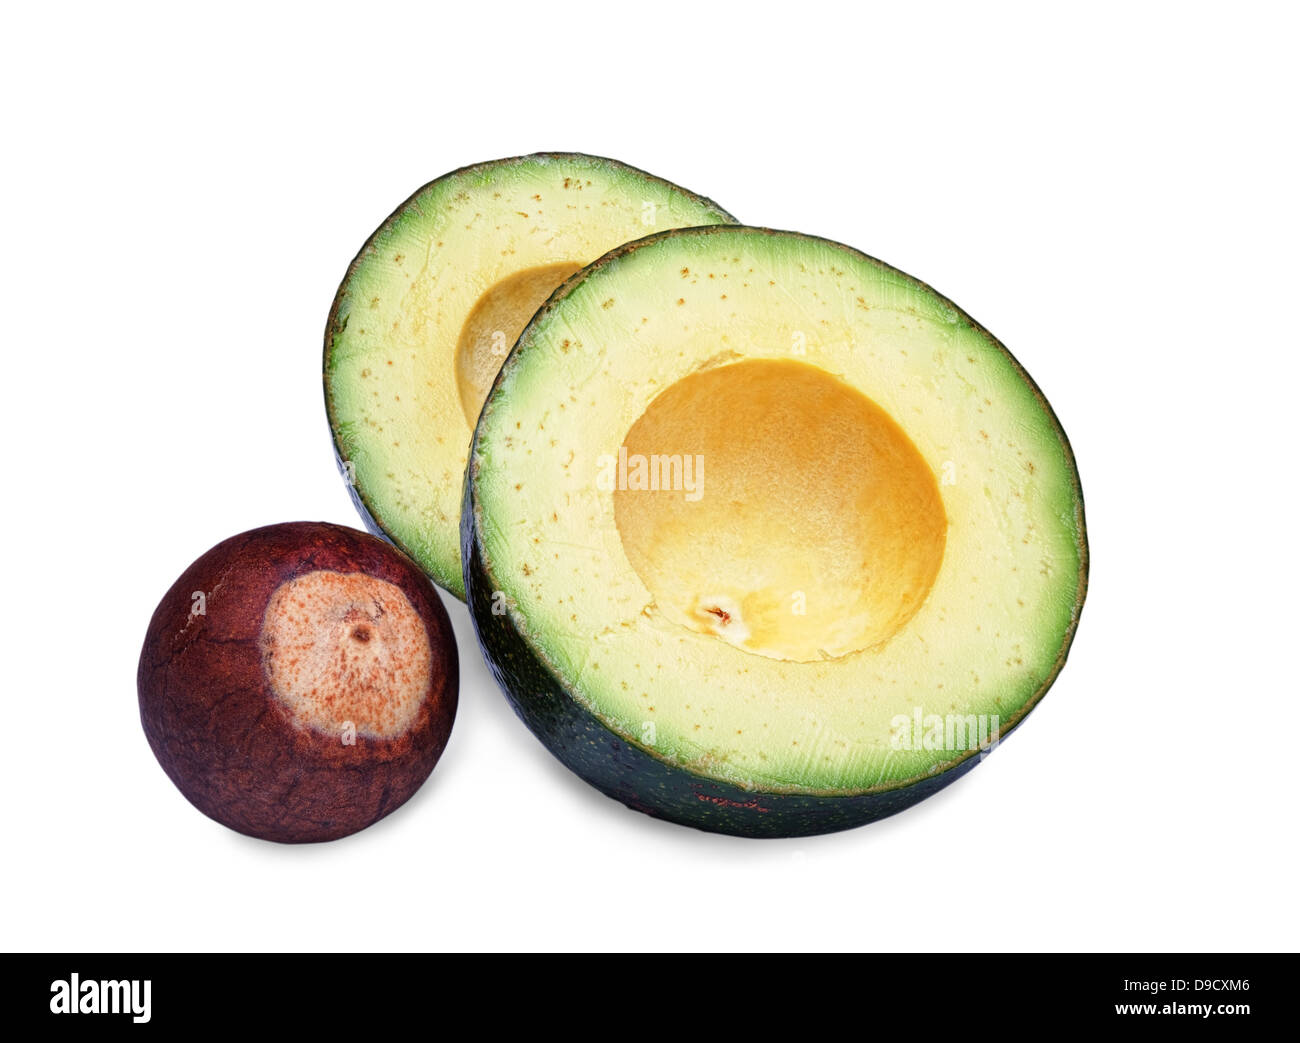 two part of avocado with seed isolated on white background Stock Photo